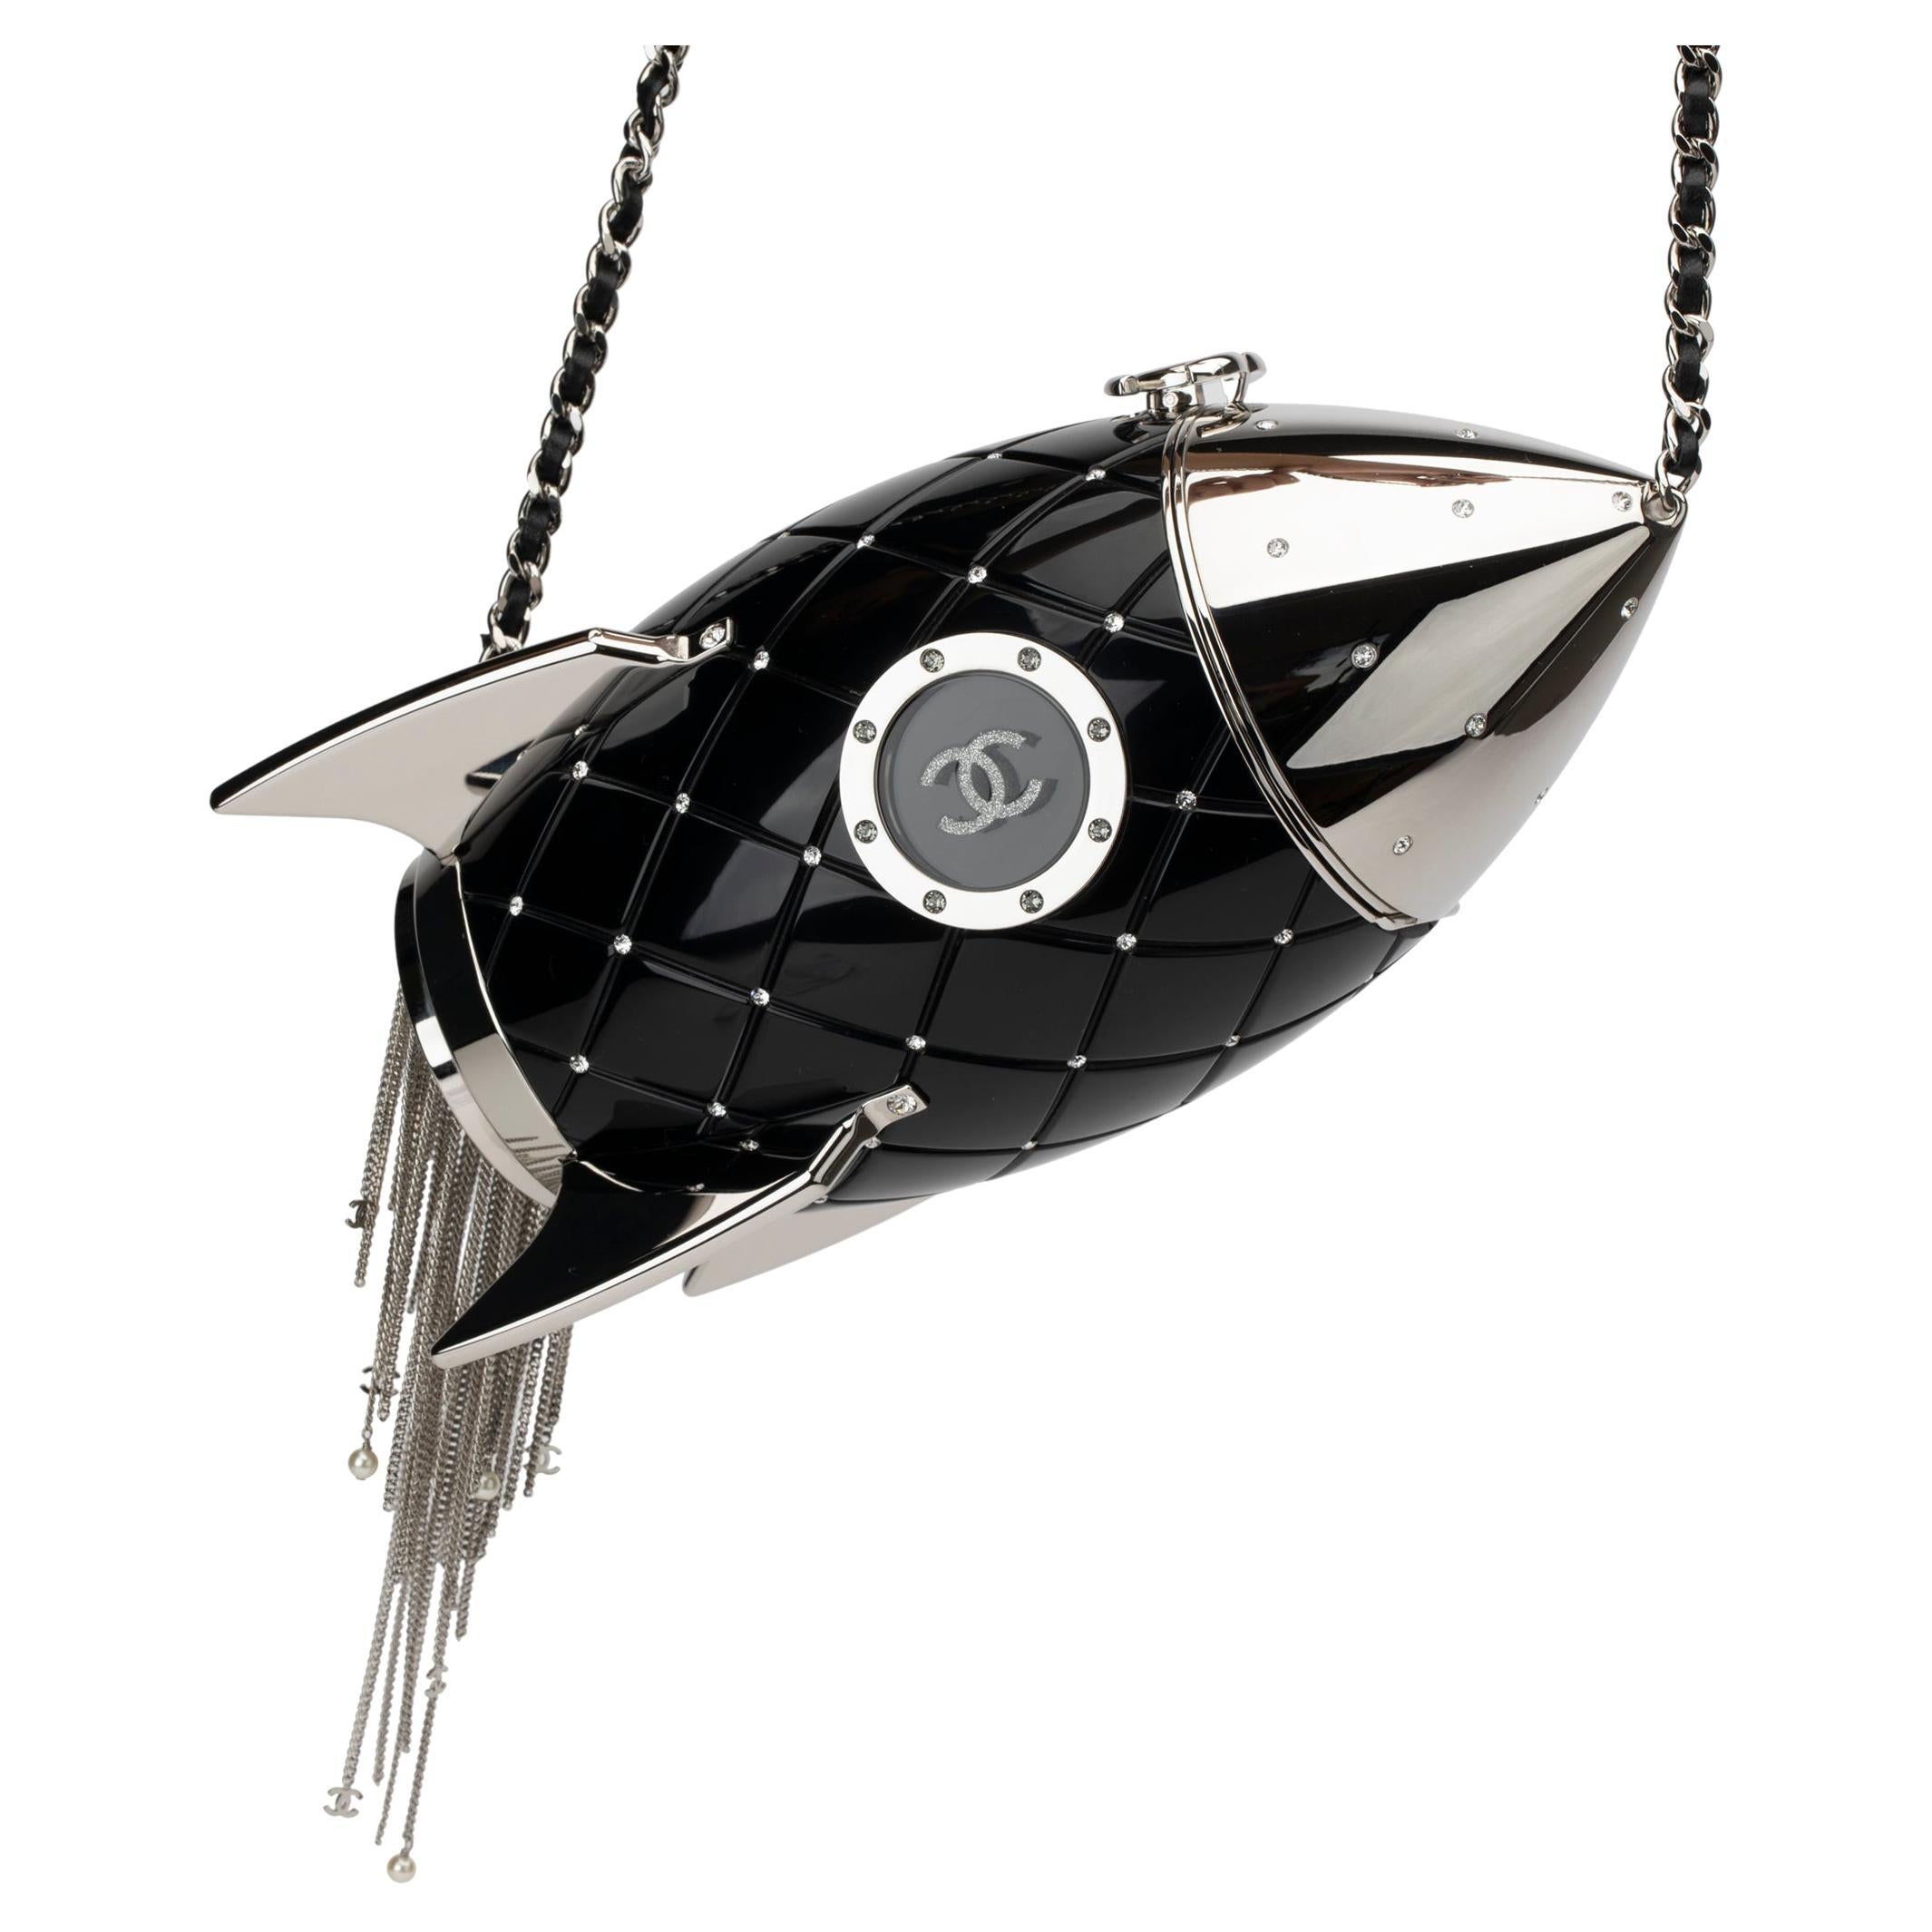 Chanel Limited Edition Black Lucite  Crystal Rocket Ship Evening  Lot  58018  Heritage Auctions